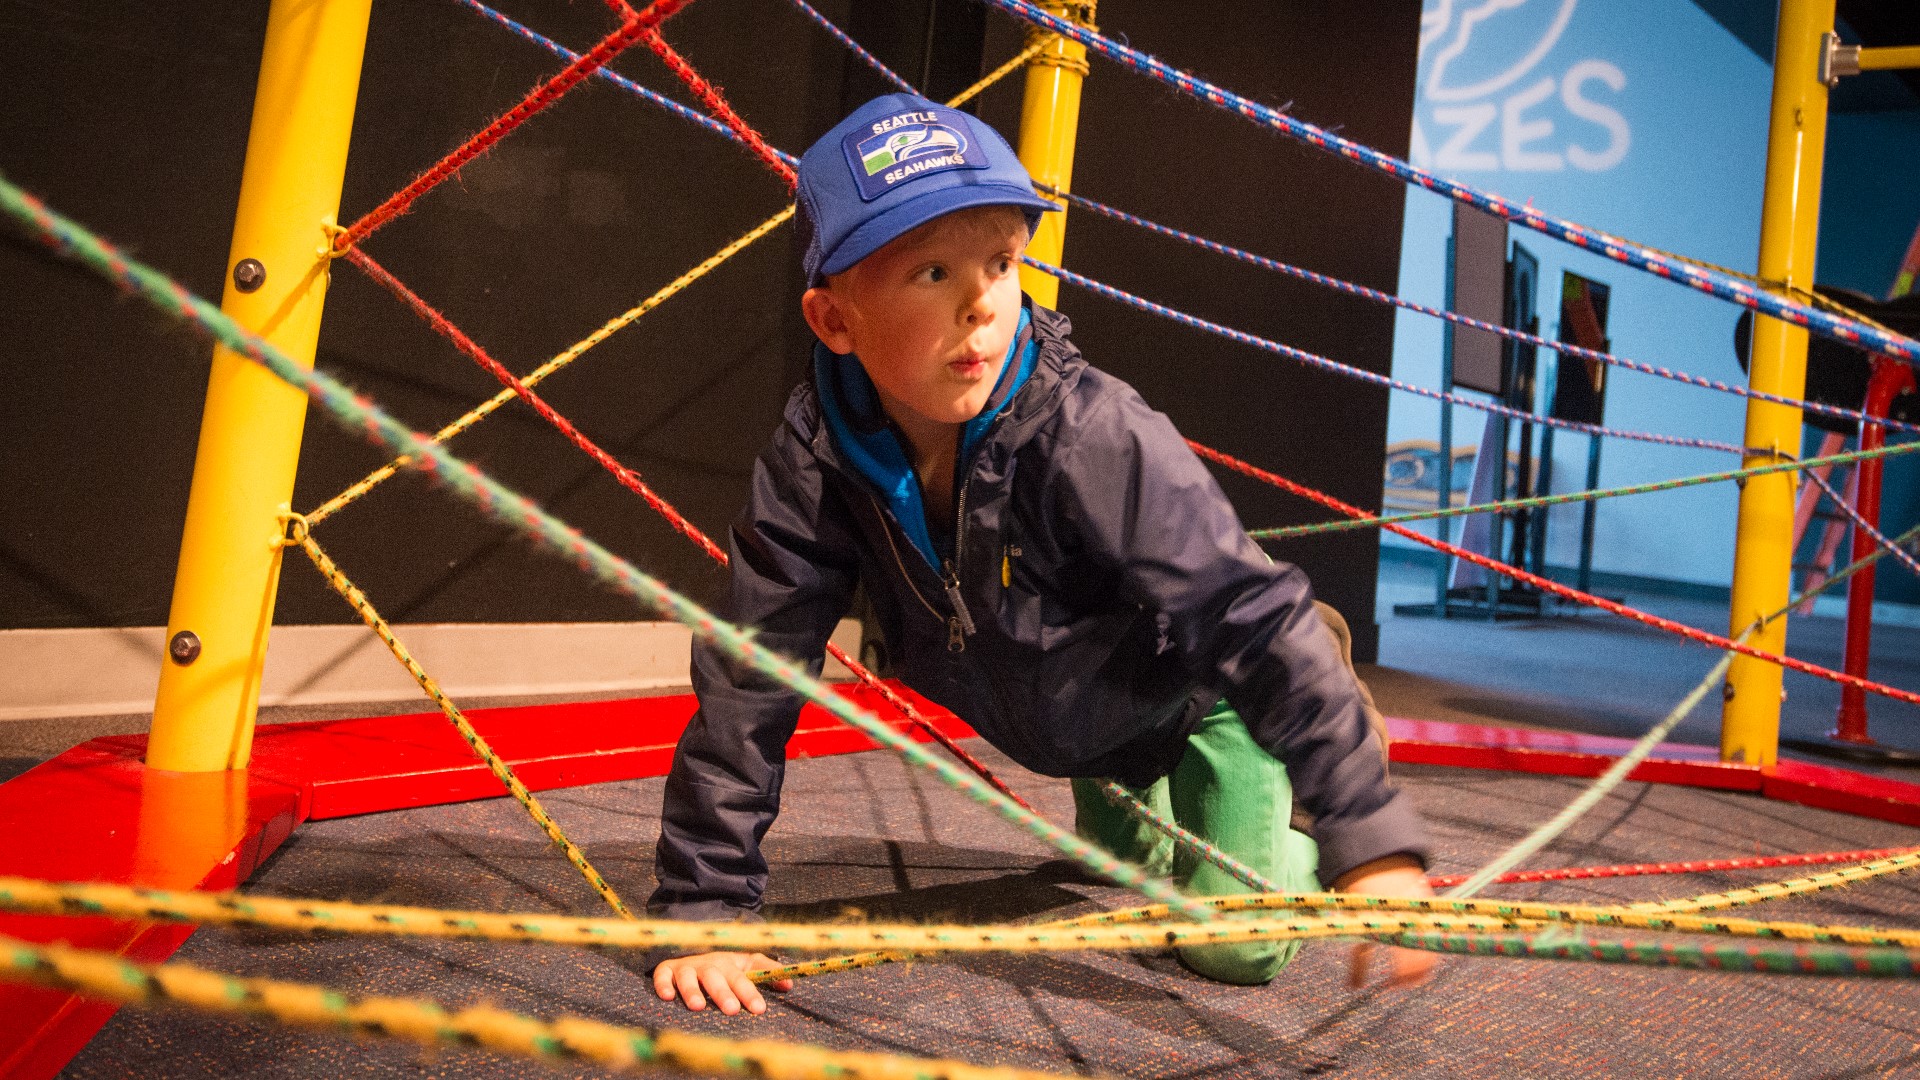 The “Mazes & Brain Games” experience at the Denver Museum of Nature and Science includes 3-D puzzles and full body games.